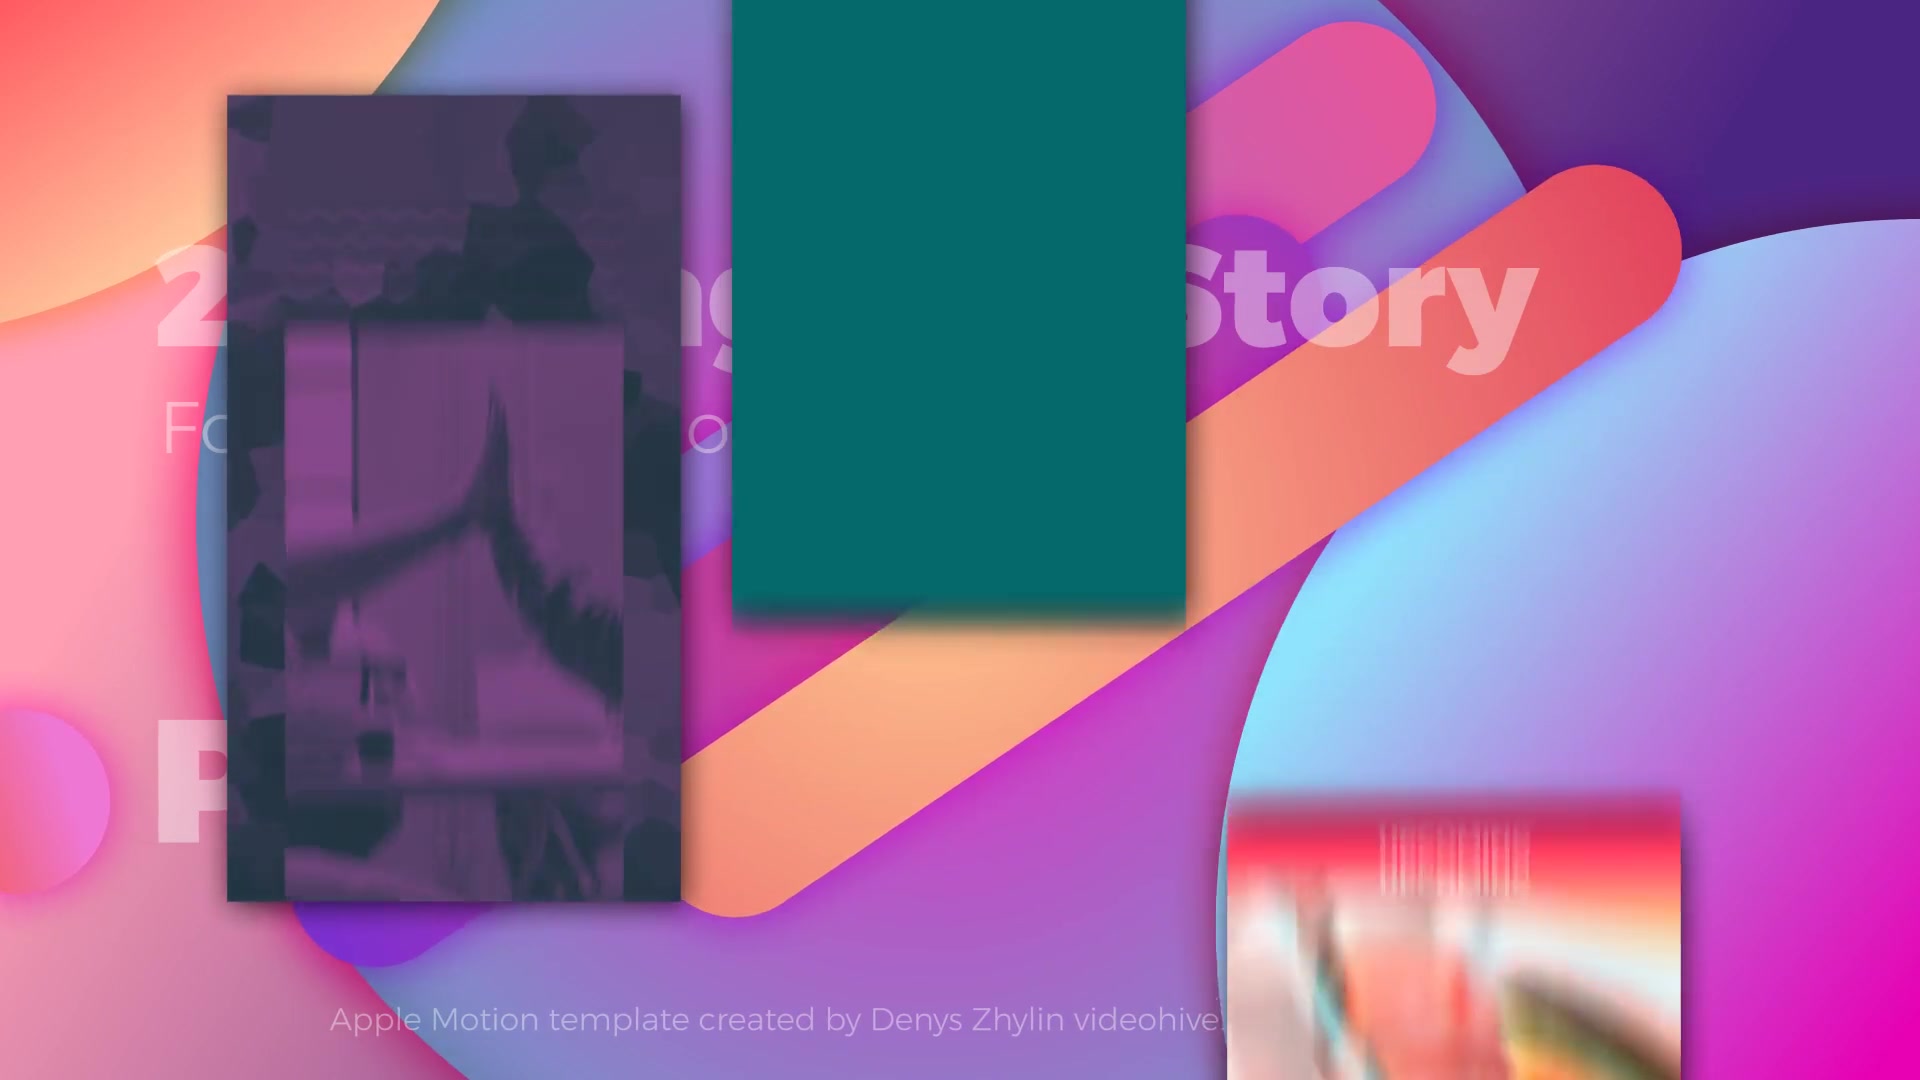 Instagram Stories for Apple Motion and FCPX Part 2 - Download Videohive 22785014